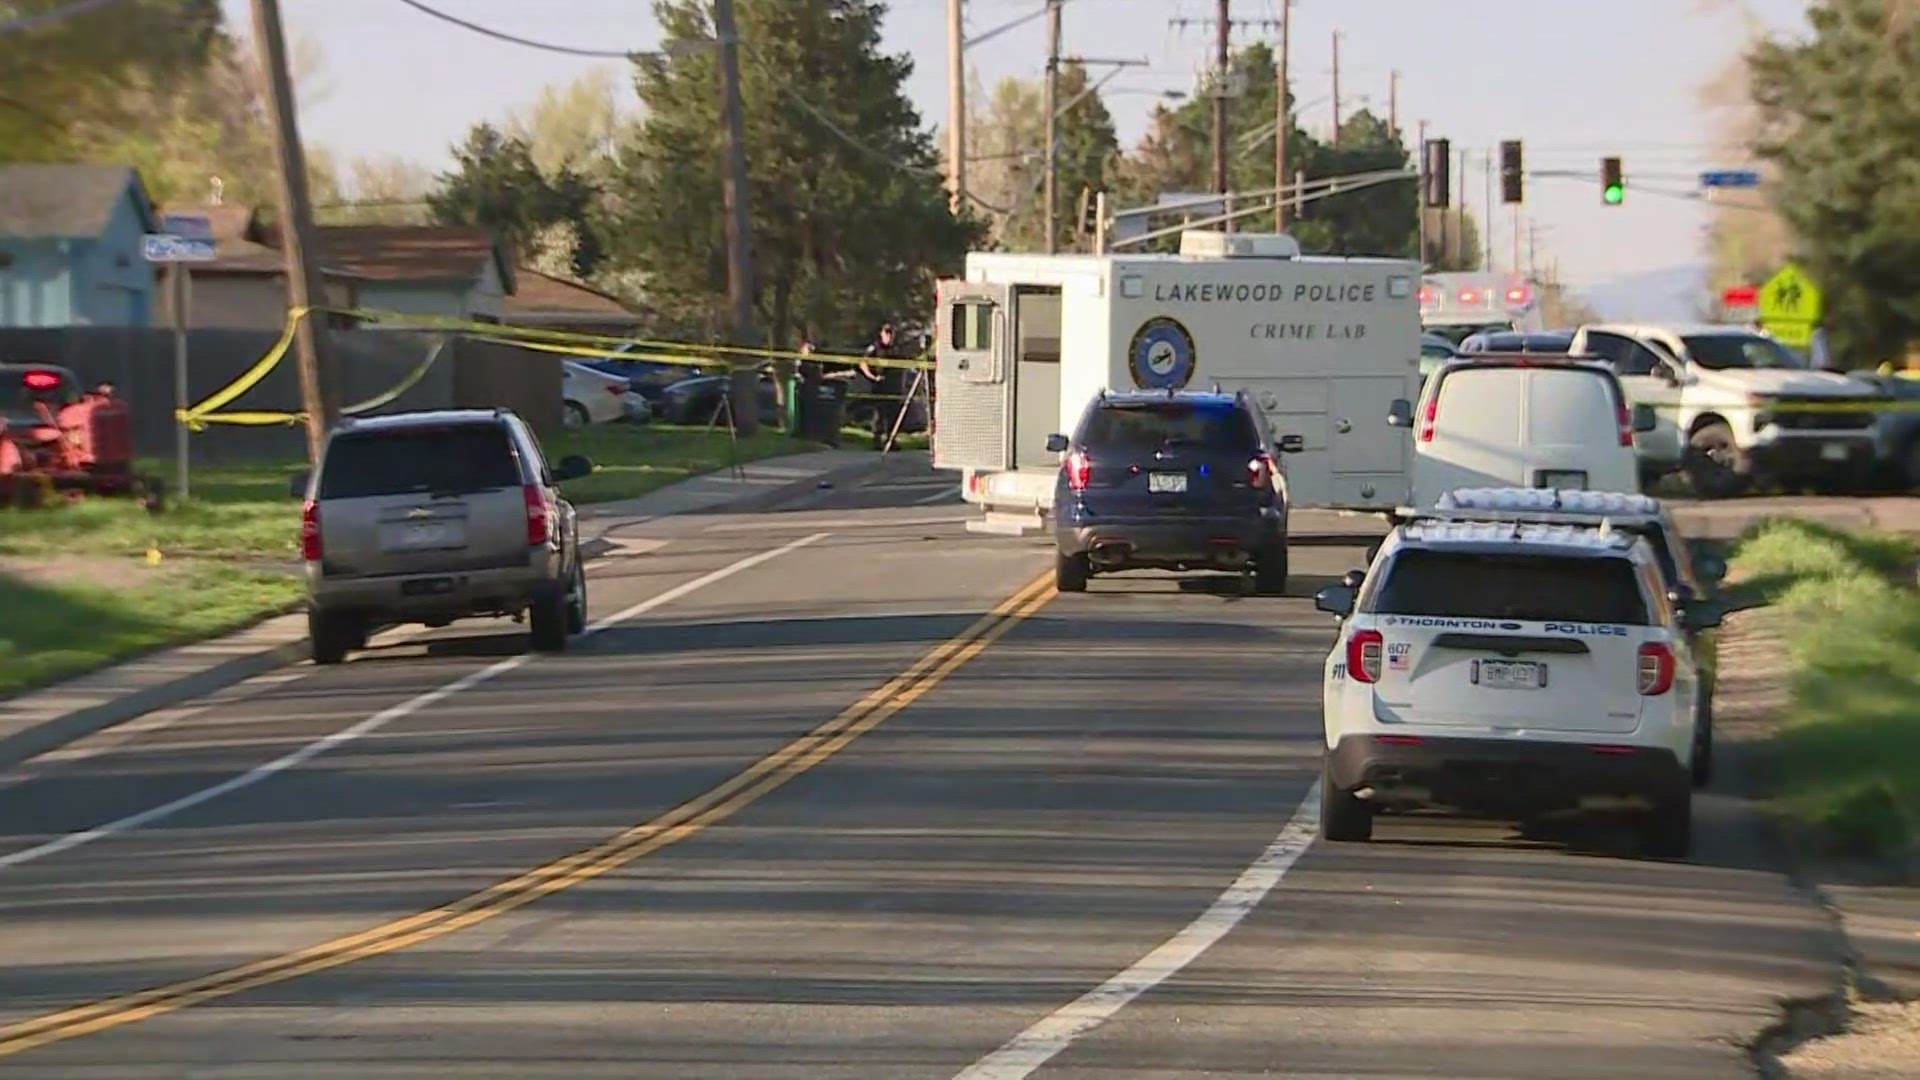 A police pursuit ended in a shooting early Tuesday morning in Lakewood involving Thornton Police.